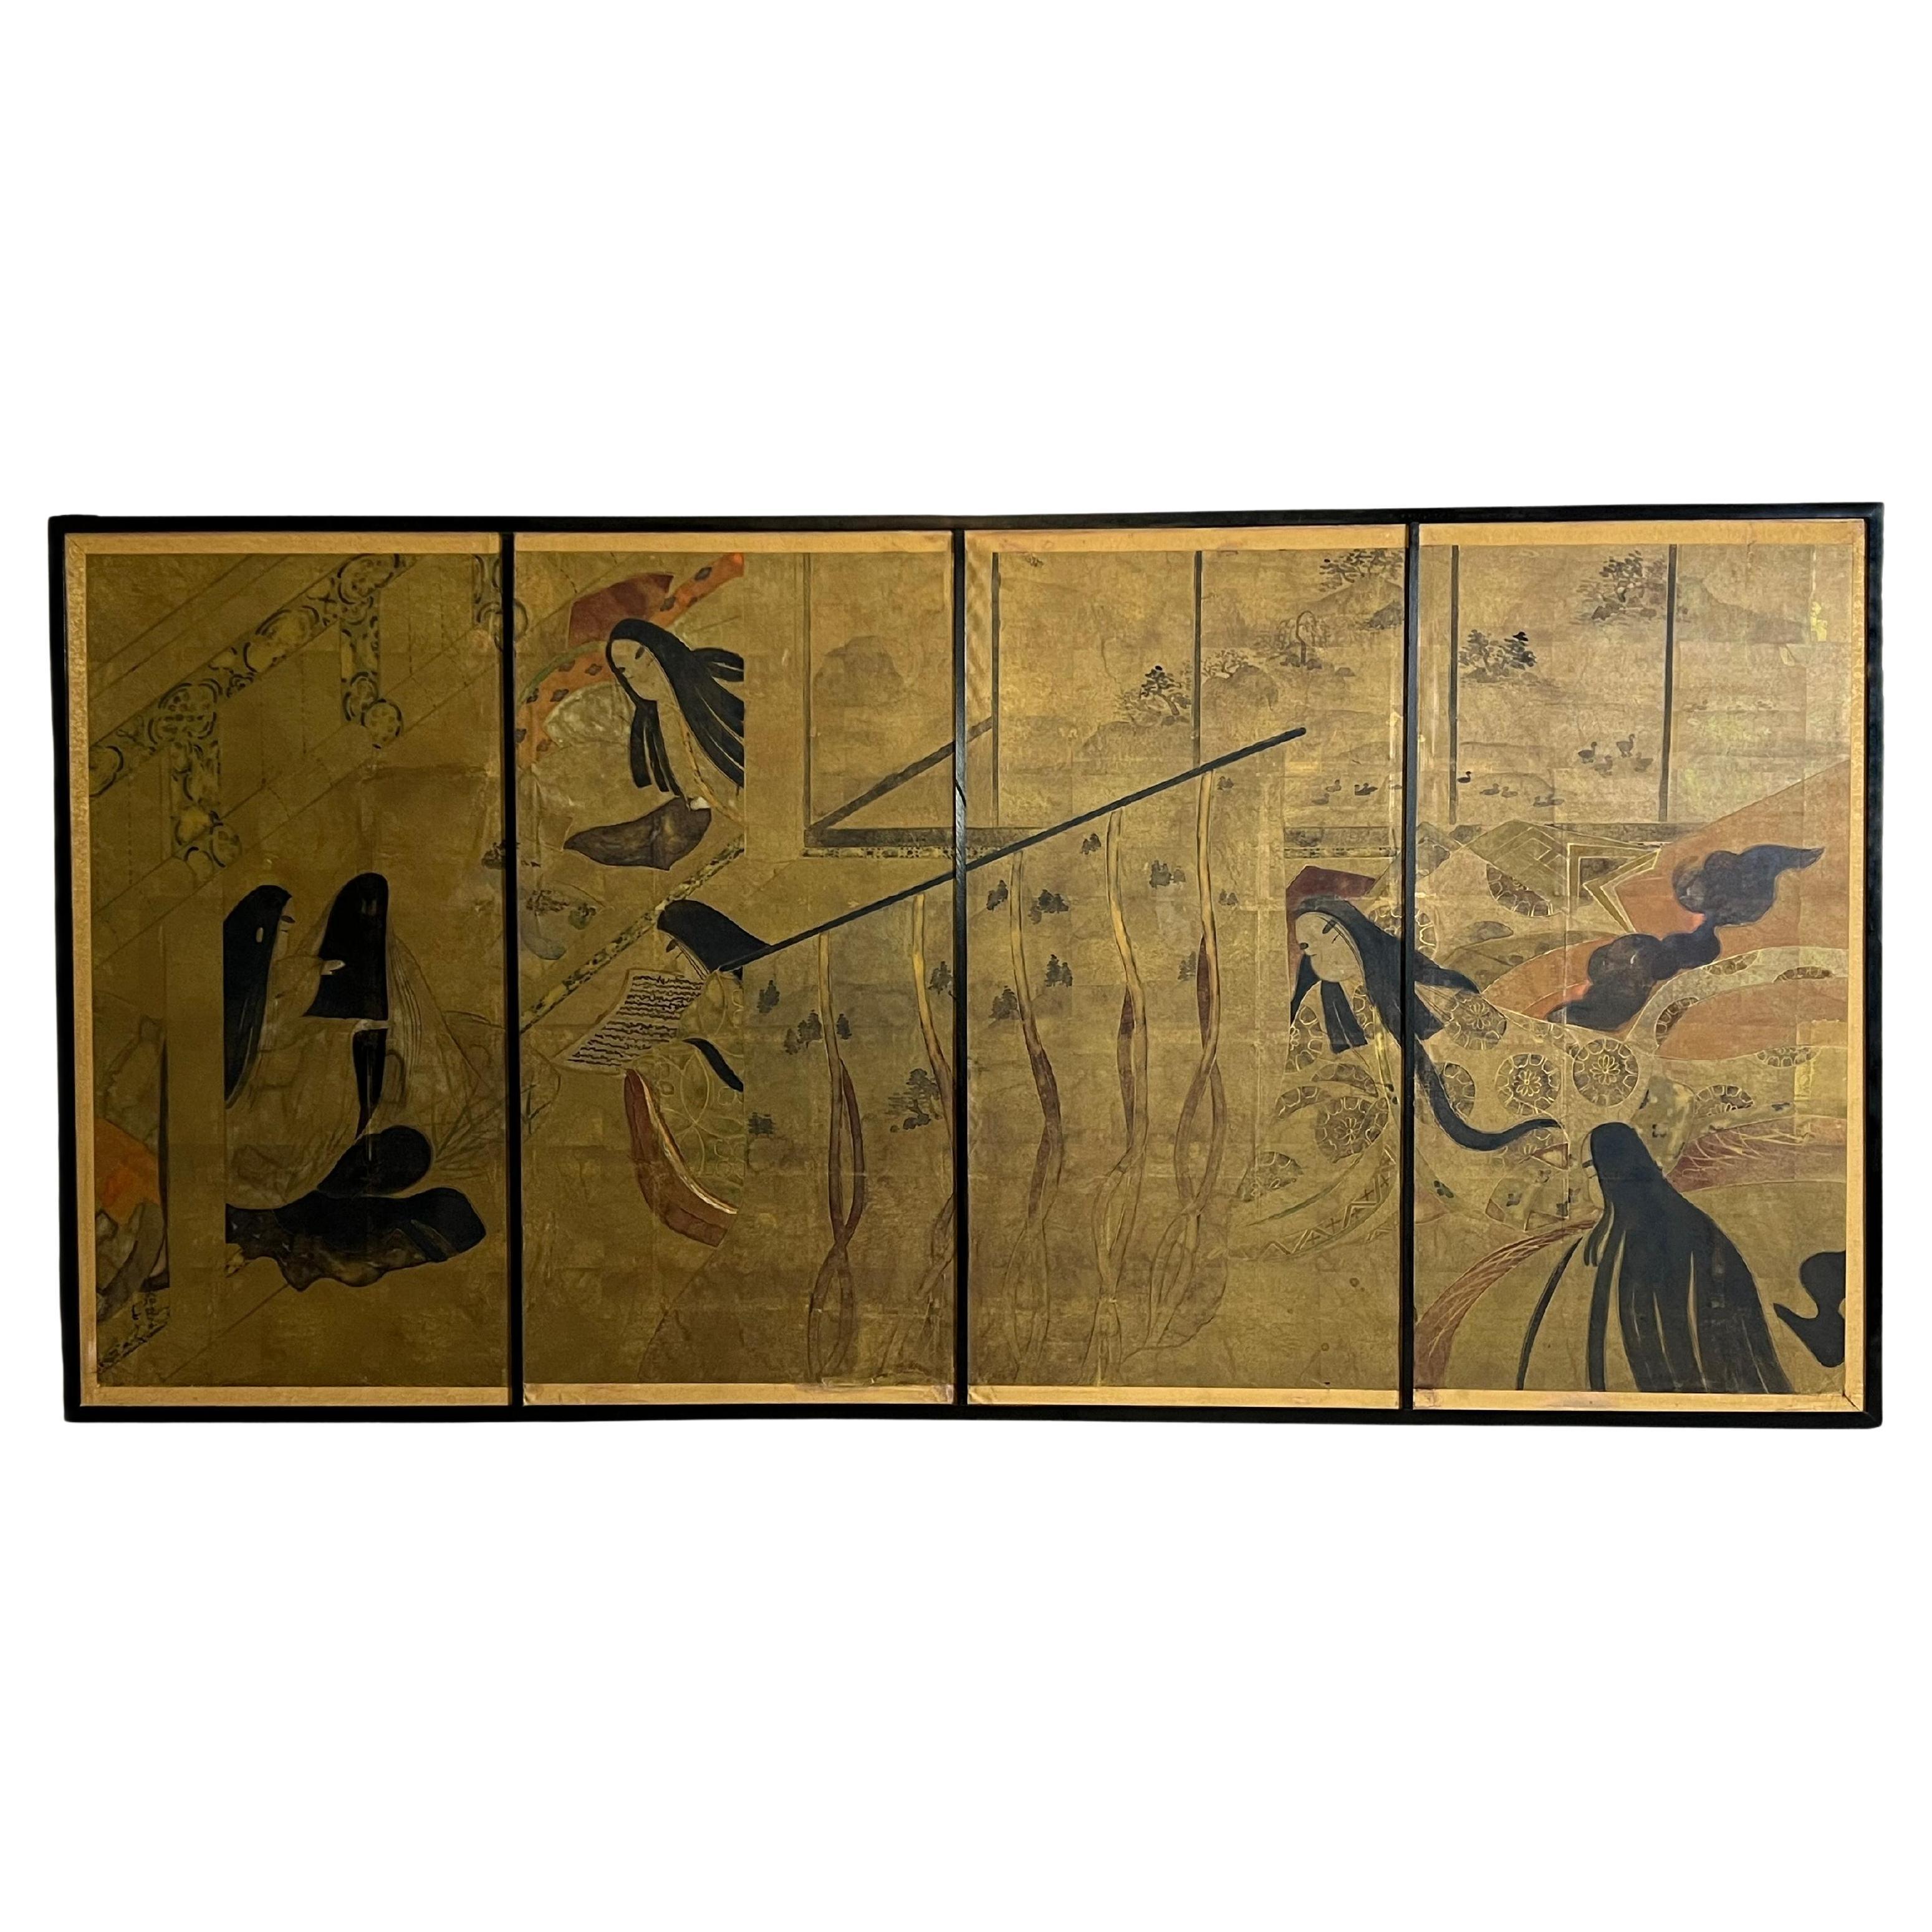 Large Lithograph of a Japanese Scene After the Tale of Genji